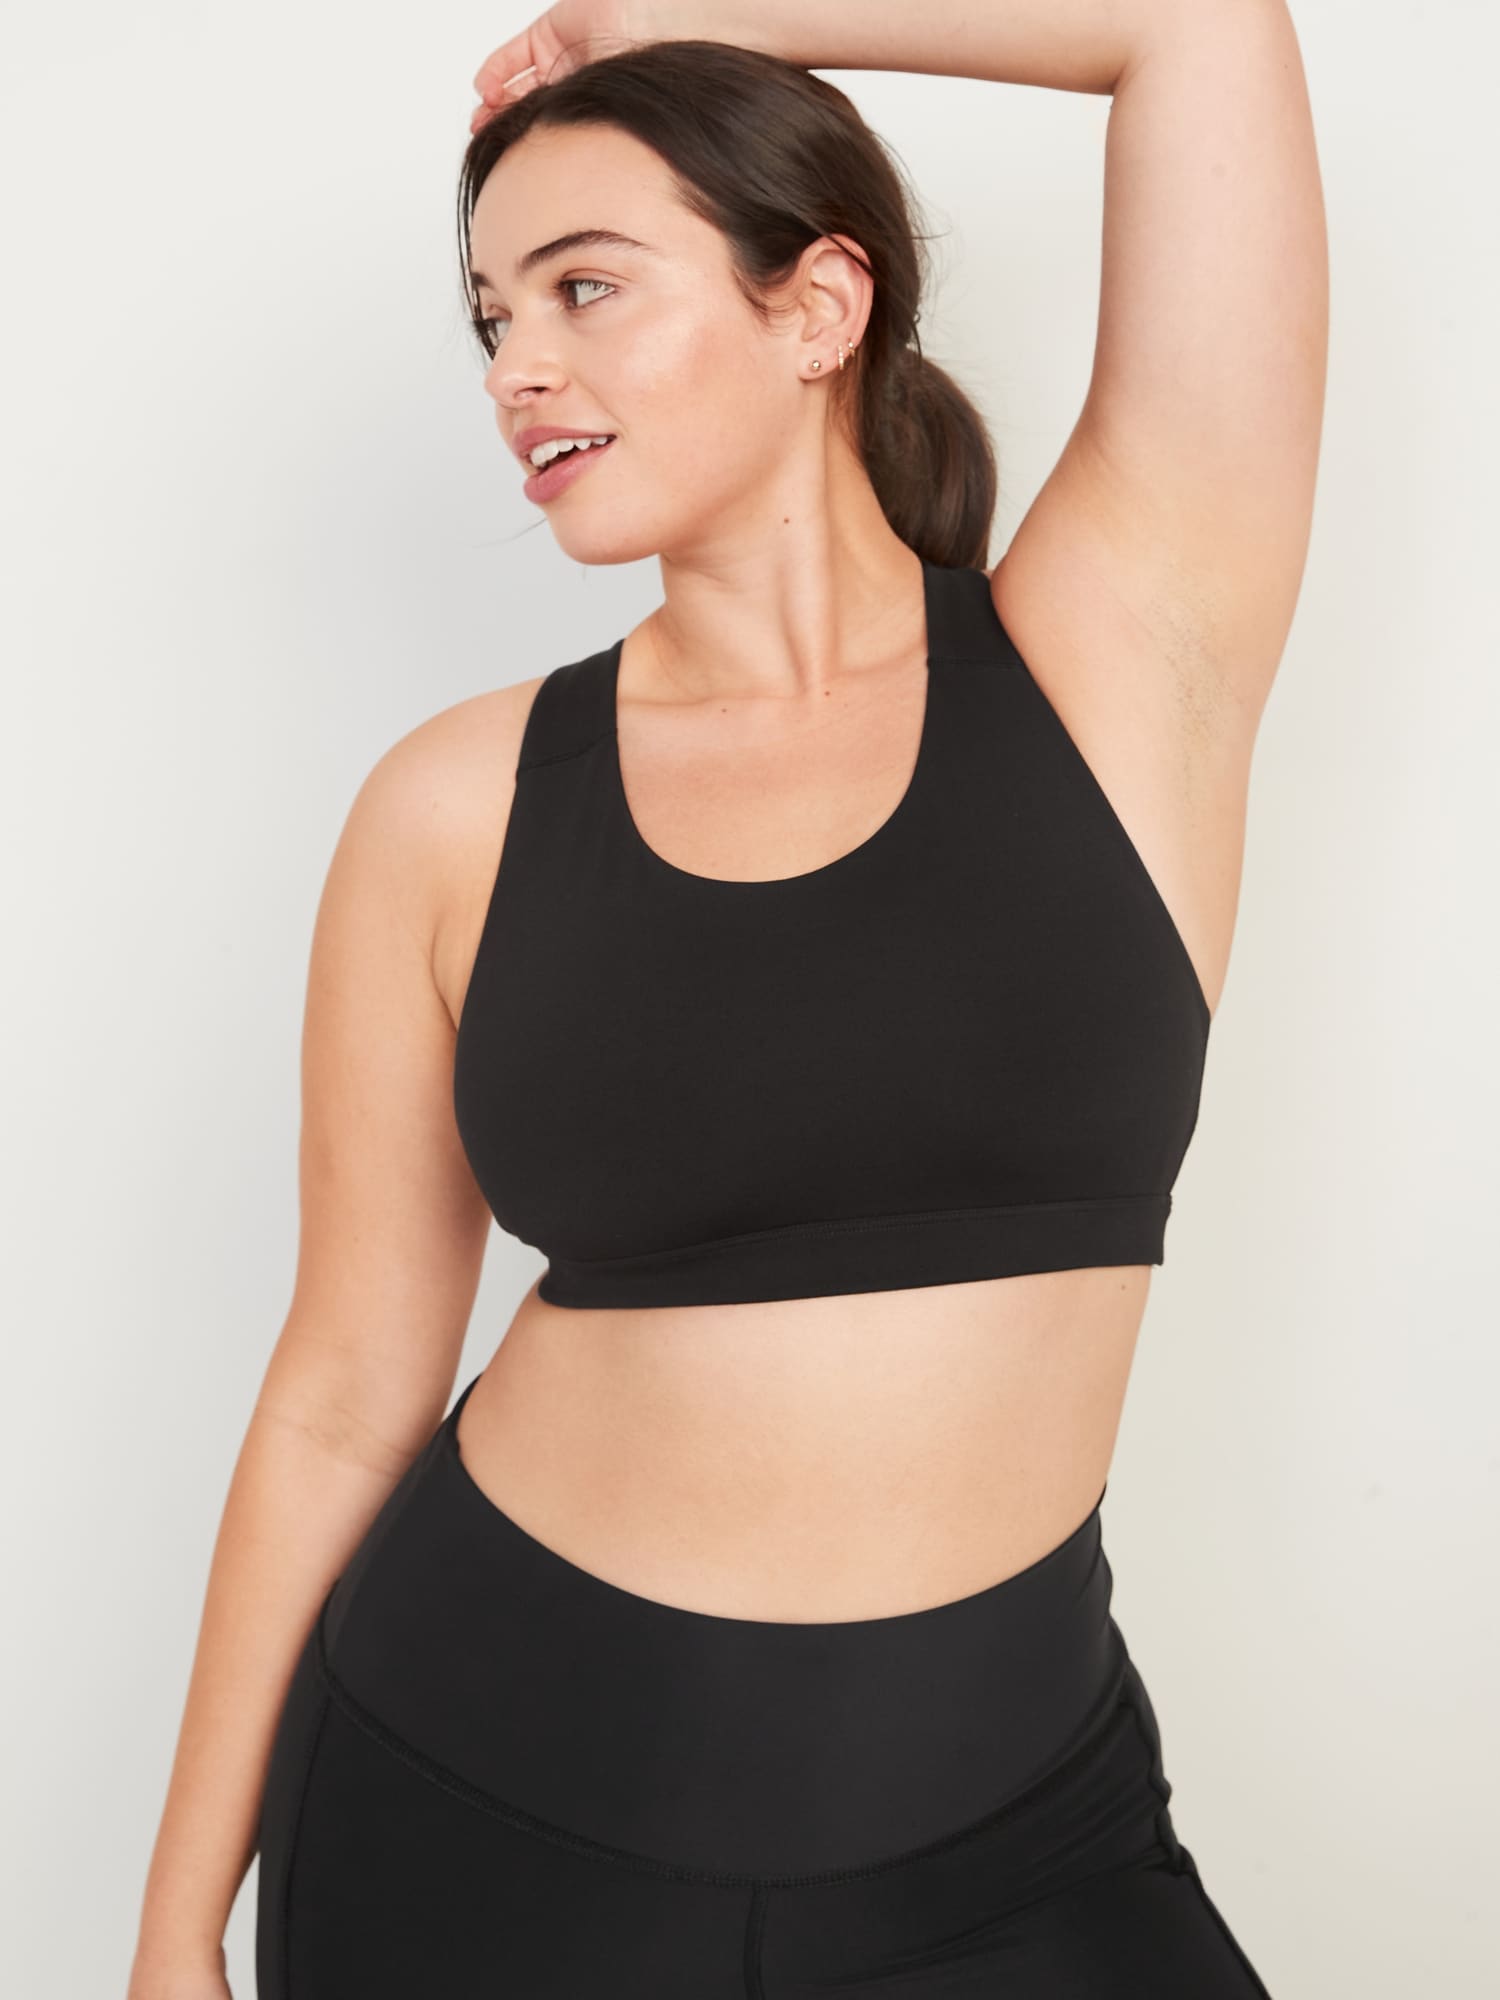 I'm 5'10, 210 lbs and a size 16, I found the perfect sports bras